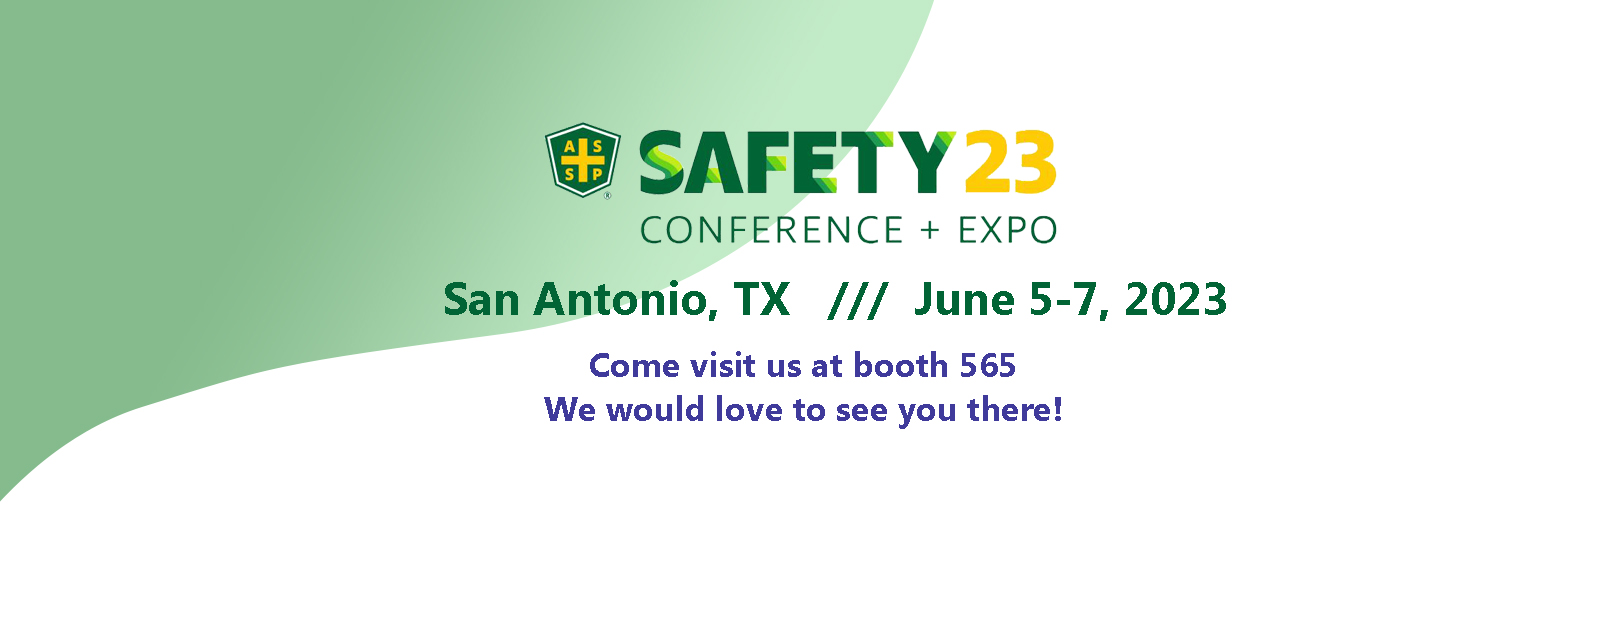 Come see us at the ASSP Safety Expo 2023 - June 5-7 - San Antonio, TX.  We will be at booth 565 and we would love to meet you in person!